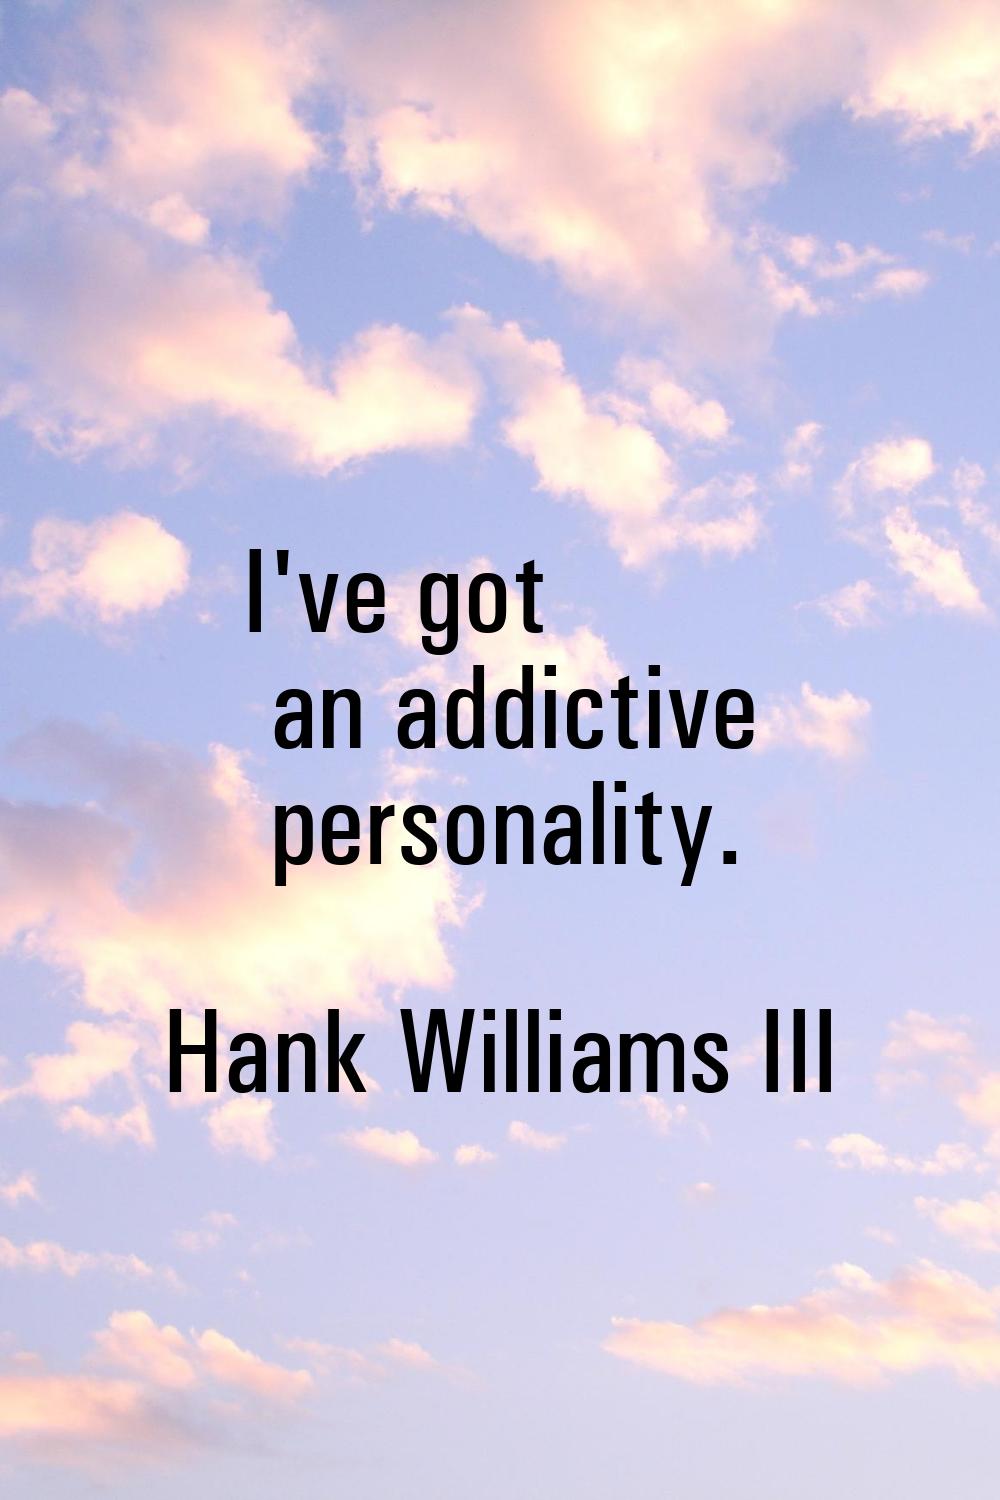 I've got an addictive personality.